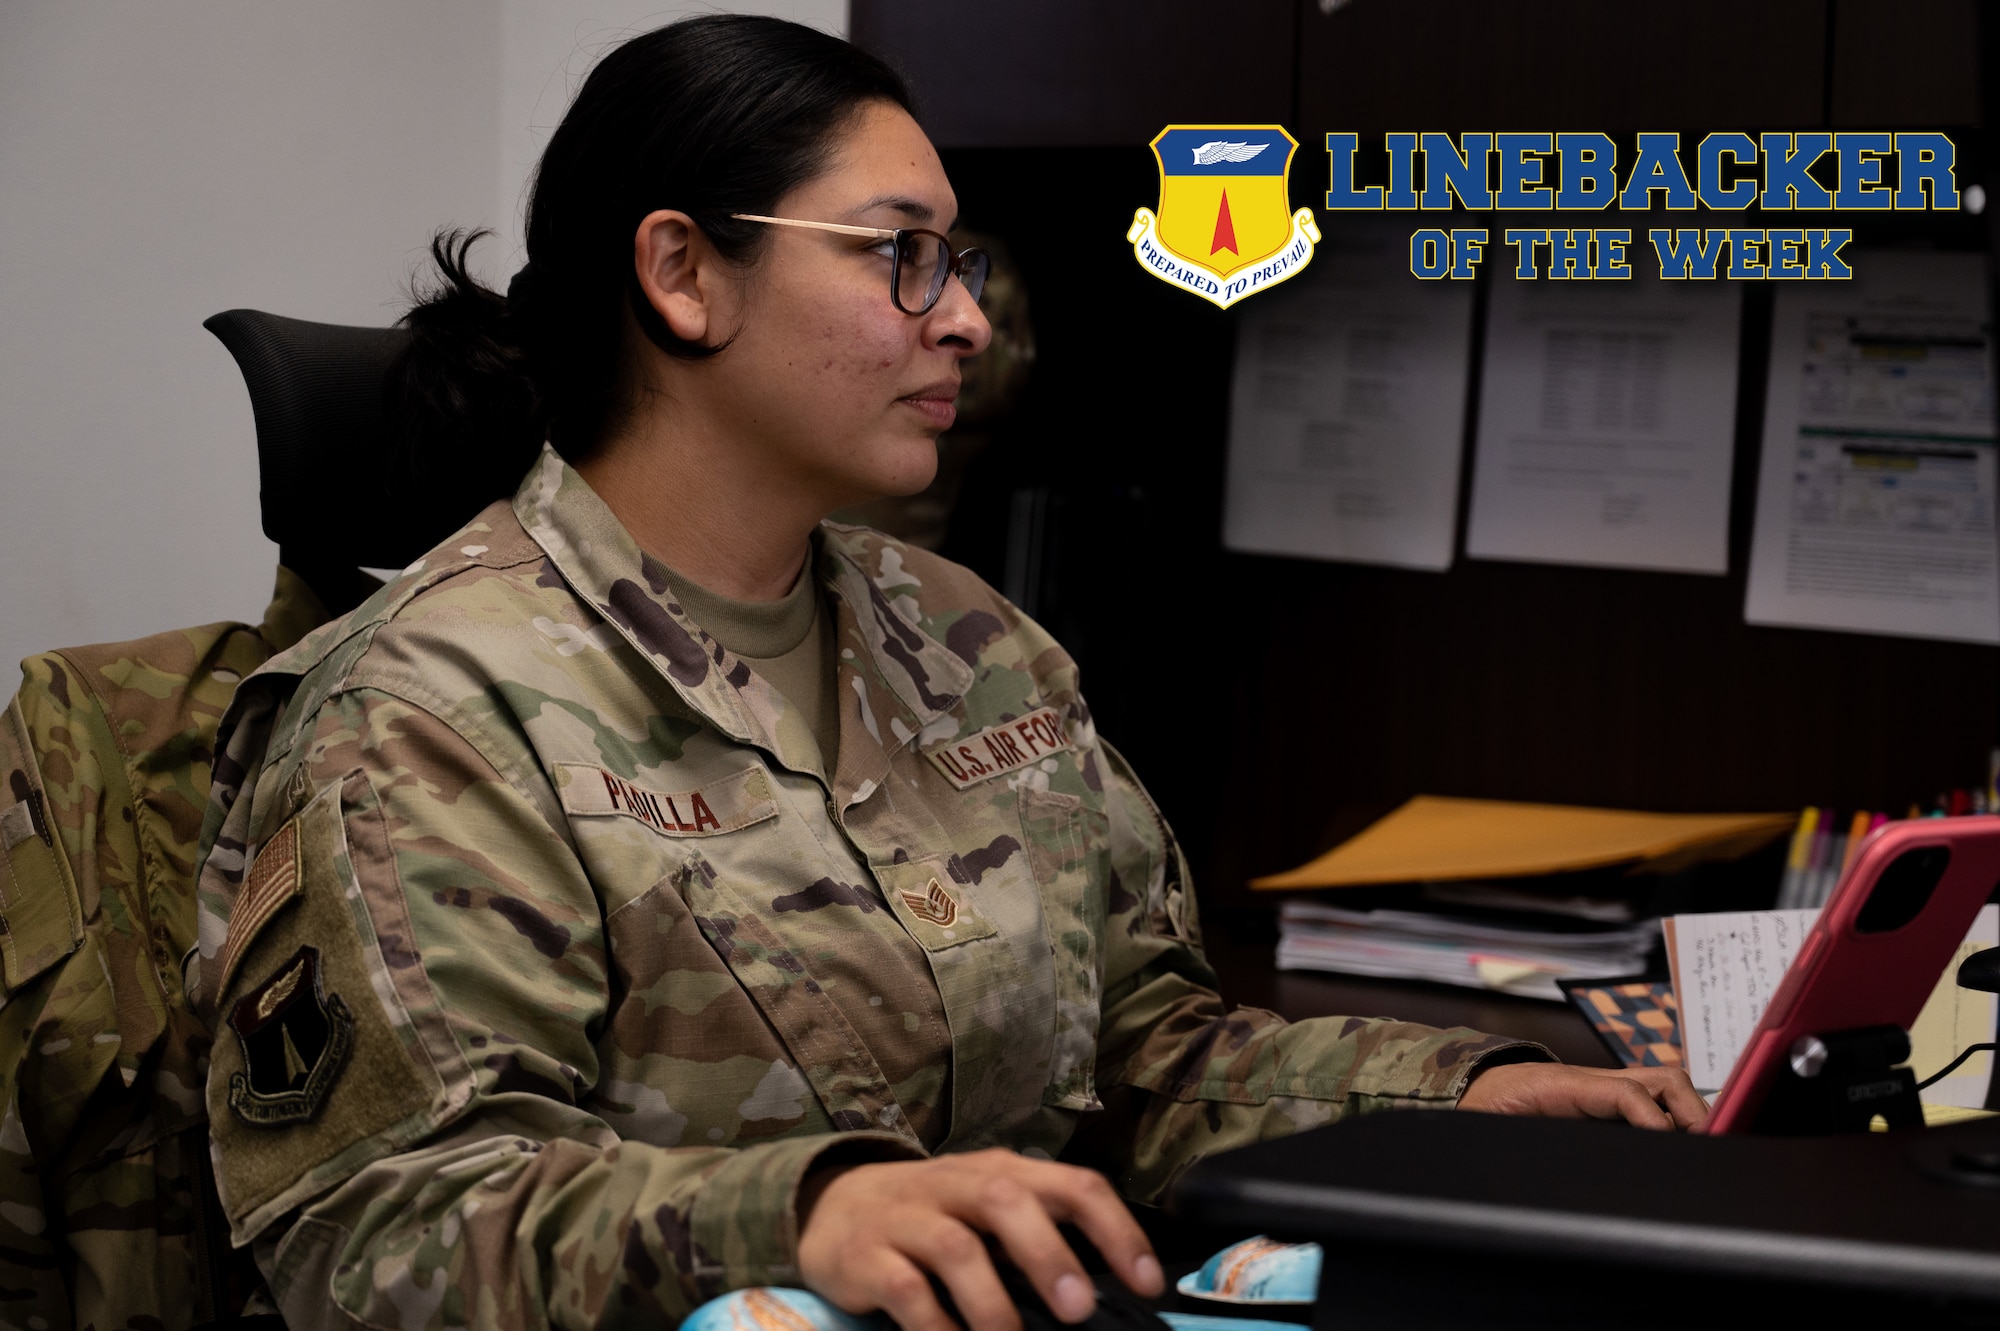 U.S. Air Force Tech. Sgt. Zarah Padilla, the commander’s executive assistant assigned to the 36th Contingency Response Group, works at her desk at Andersen Air Force Base, Guam, Jan. 18, 2023. The Team Andersen Linebacker of the Week recognizes outstanding enlisted, officer, civilian and total force personnel who have had an impact on achieving Team Andersen’s mission, vision and priorities. (U.S. Air Force photo illustration by Airman 1st Class Emily Saxton)